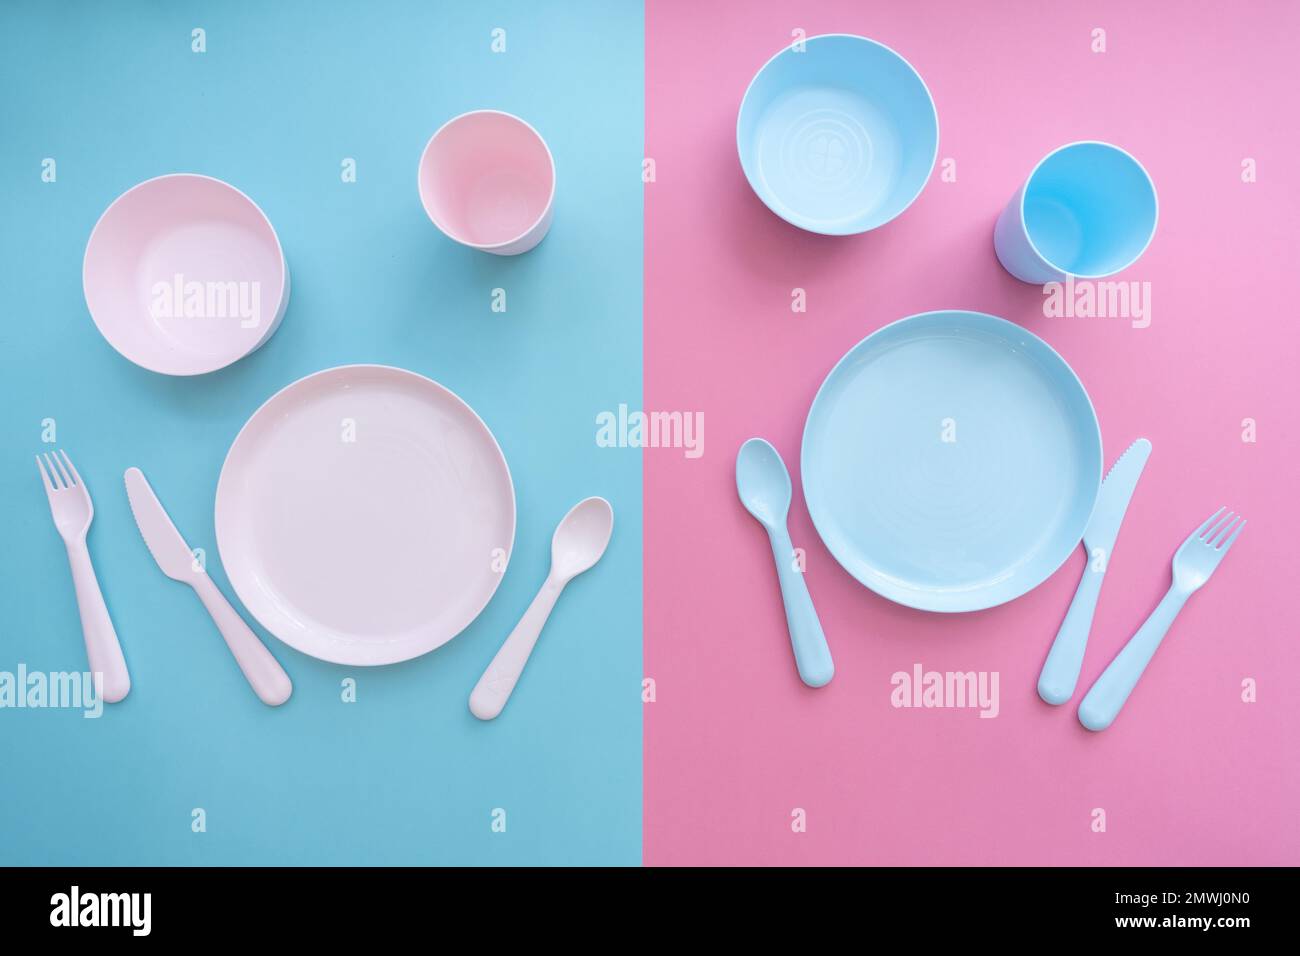 Flat lay baby feeding set. Sippy cup, plate, bowl, cutlery on pastel pink and blue background. Toddler self feeding training, baby weaning concept. Stock Photo